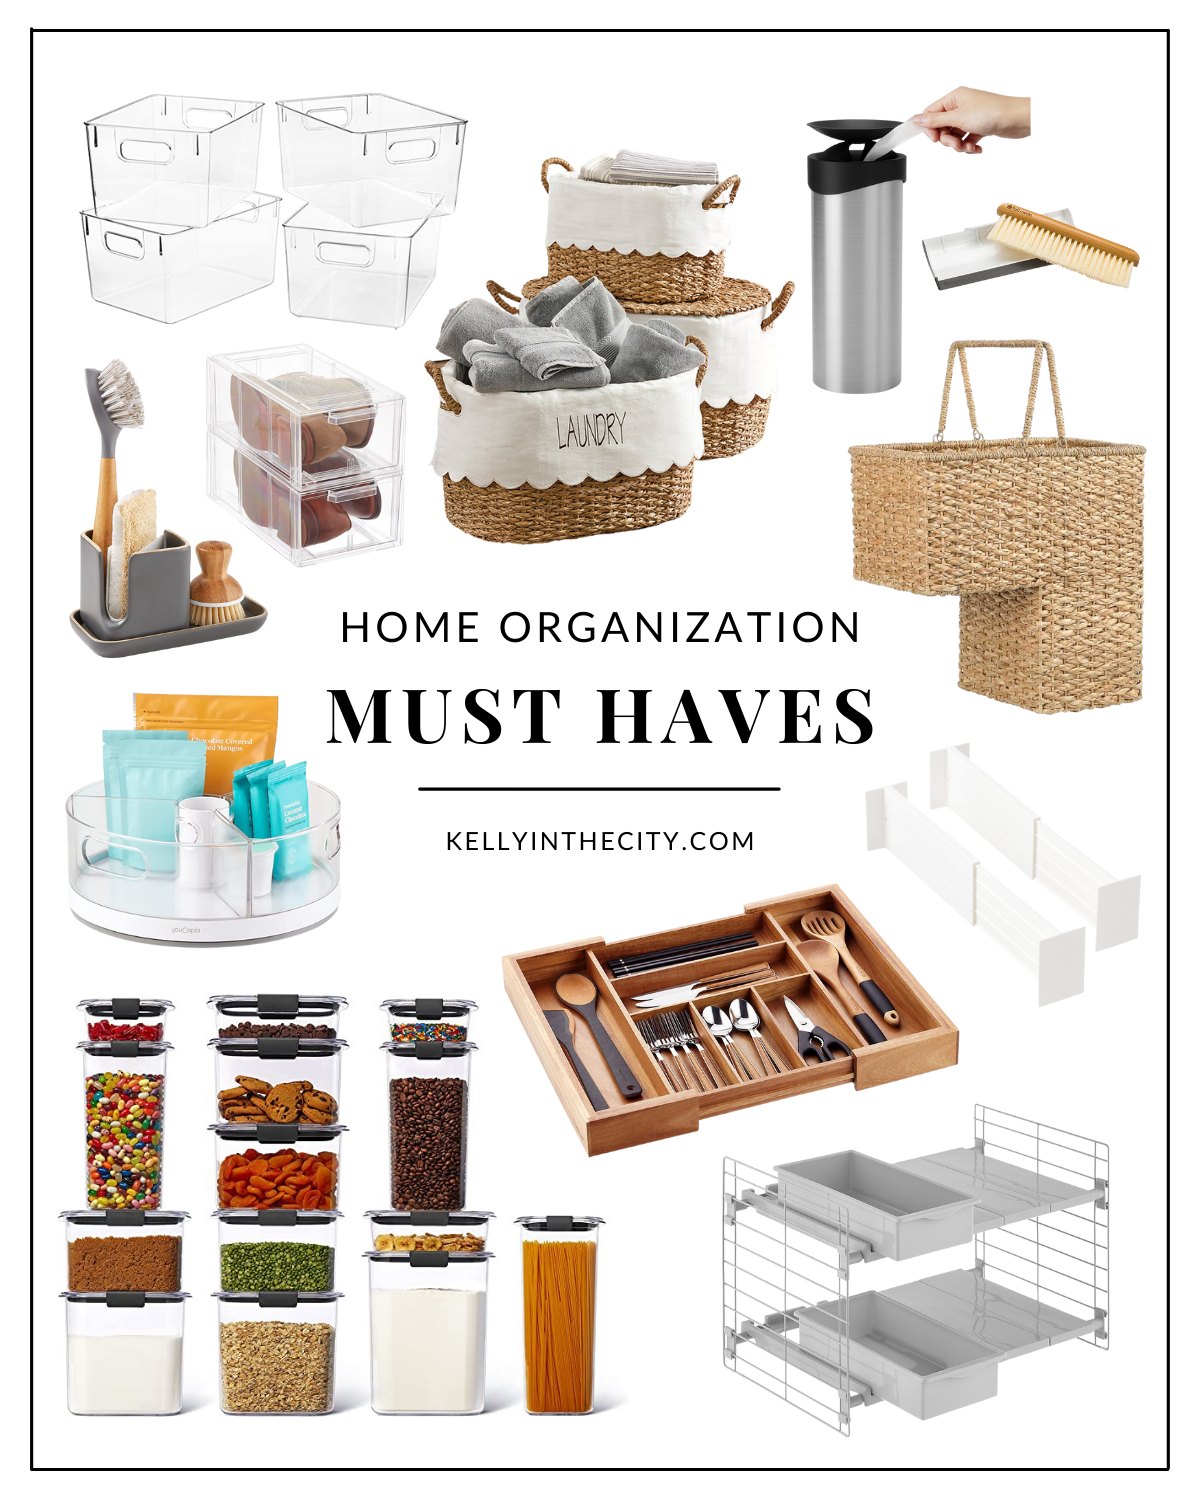 Home Organization Must Haves - Kelly in the City